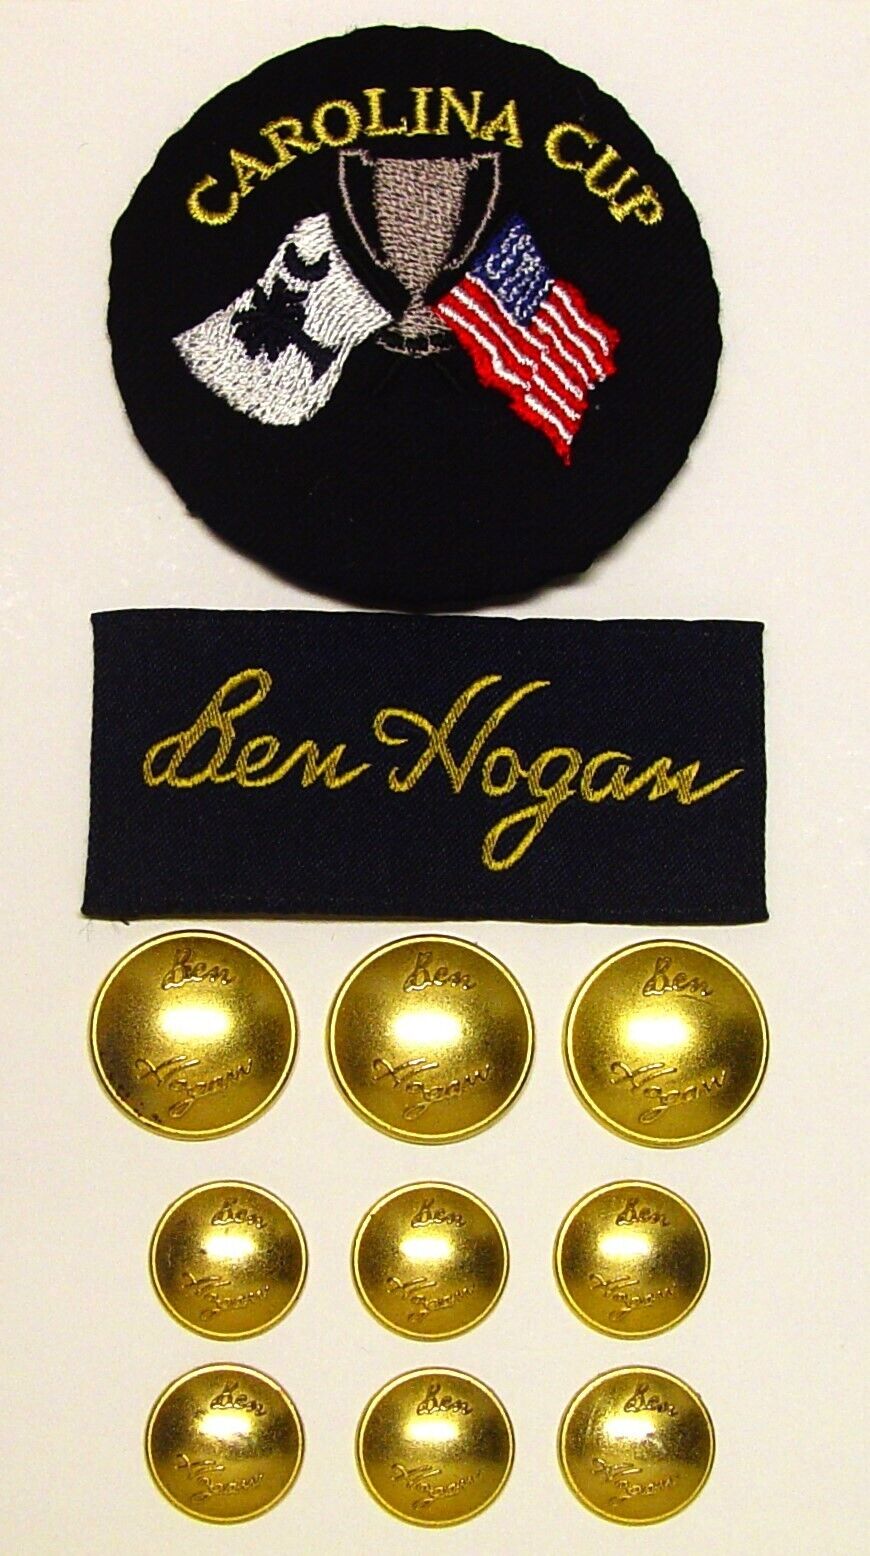 BEN HOGAN  Replacement Buttons 9 VTG gold tone signature buttons Good Used Cond.